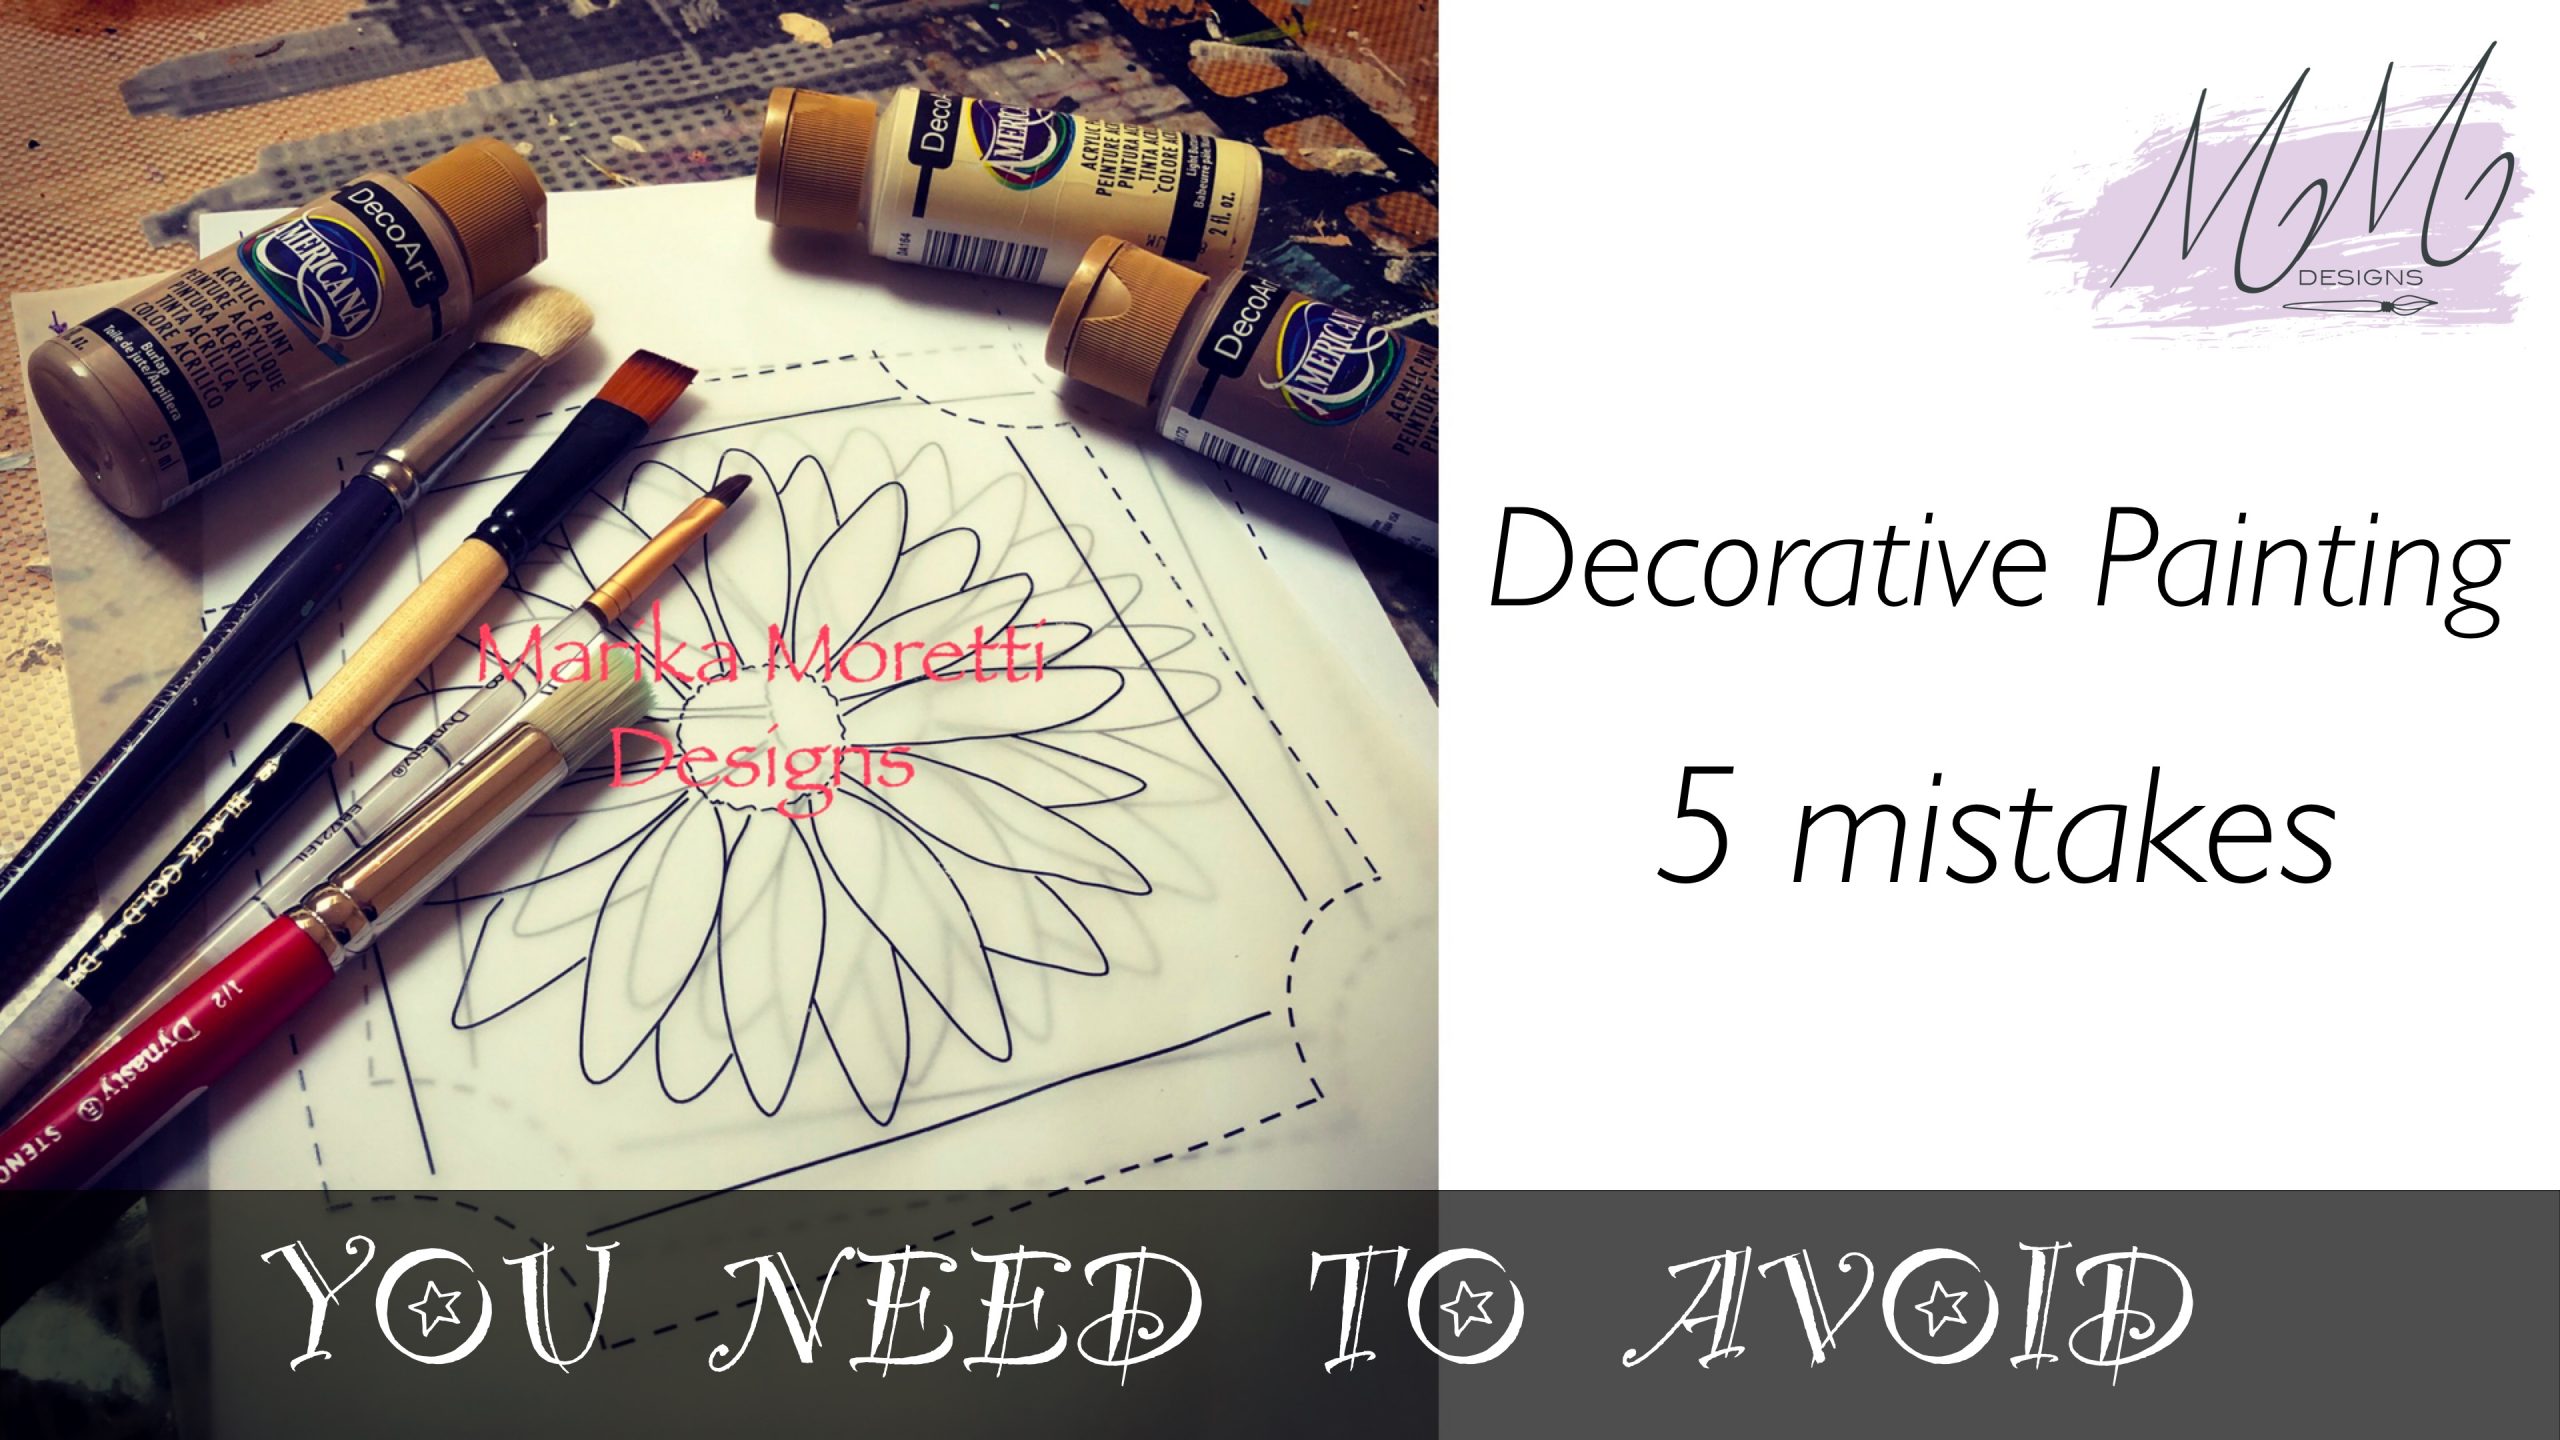 Decorative Painting: mistakes to avoid